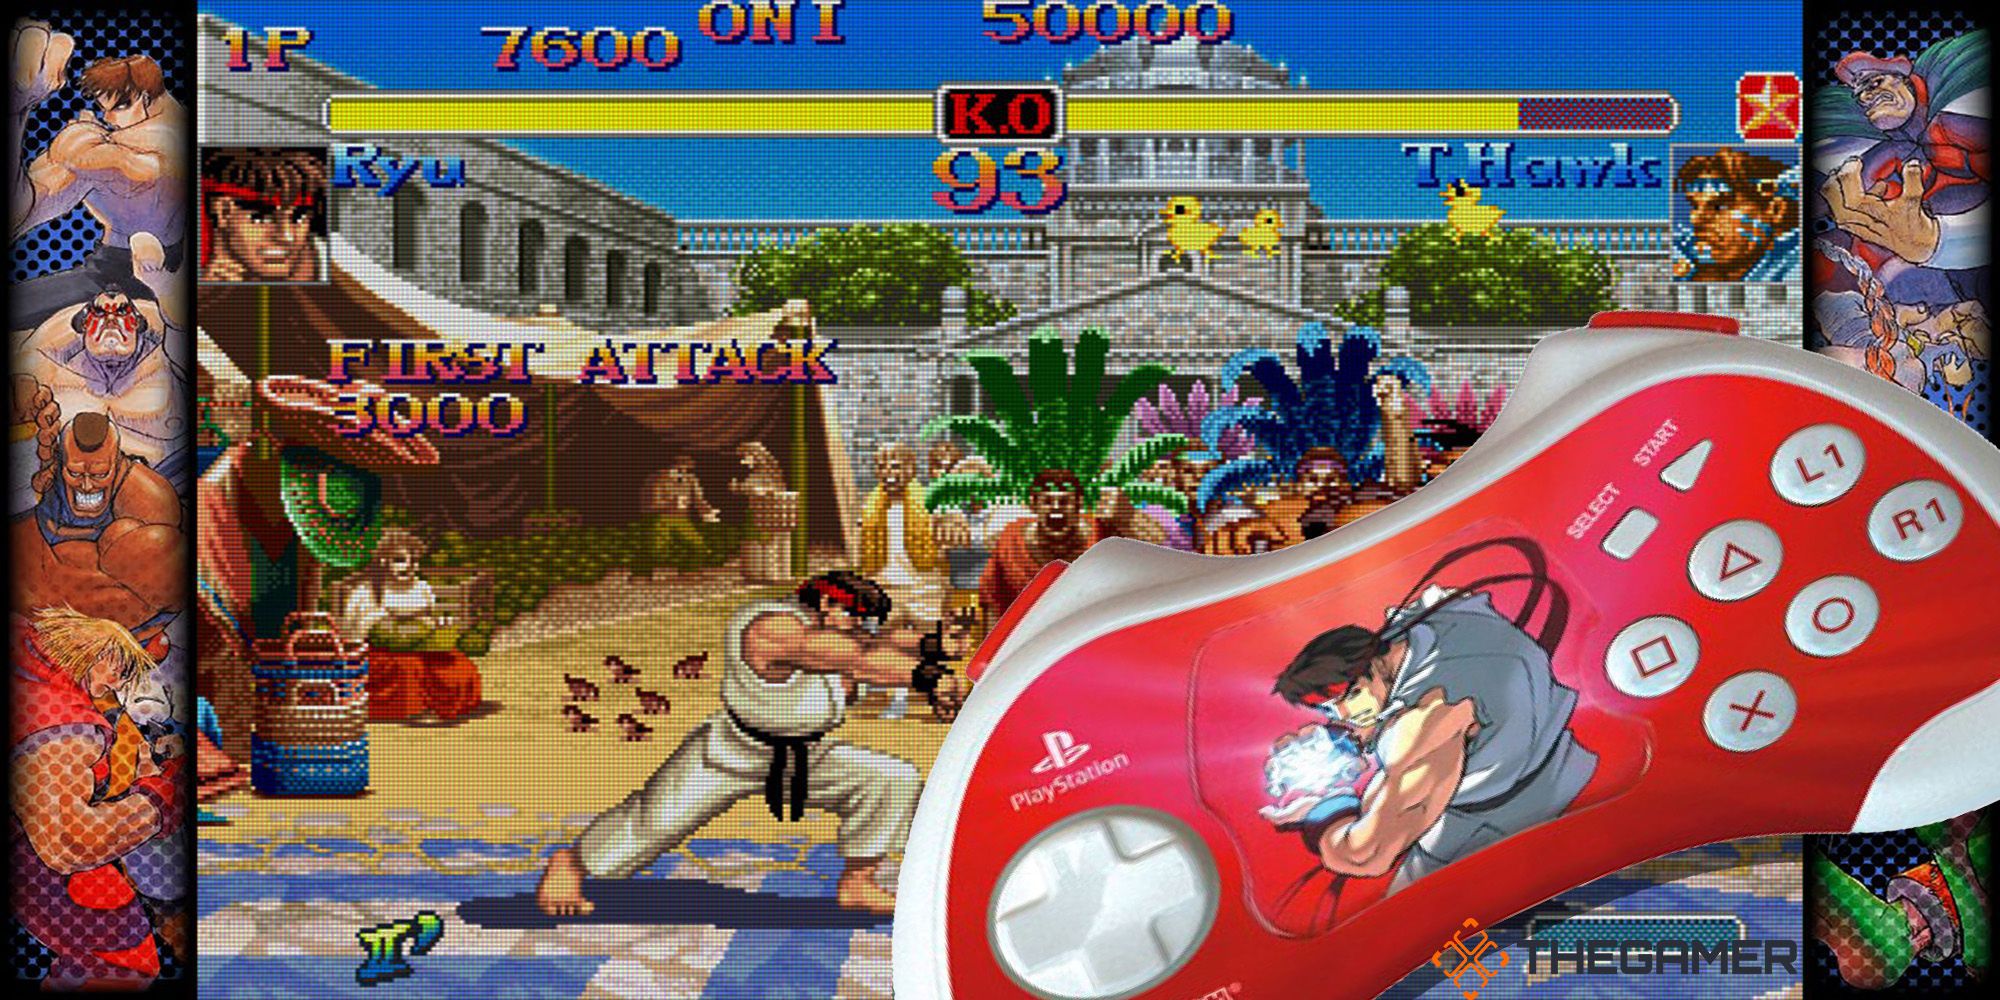 A red nubytech Street Fighter PS2 fight pad against a screen shot from Hyper Street Fighter 2: The Anniversary Edition. Custom image for TG.